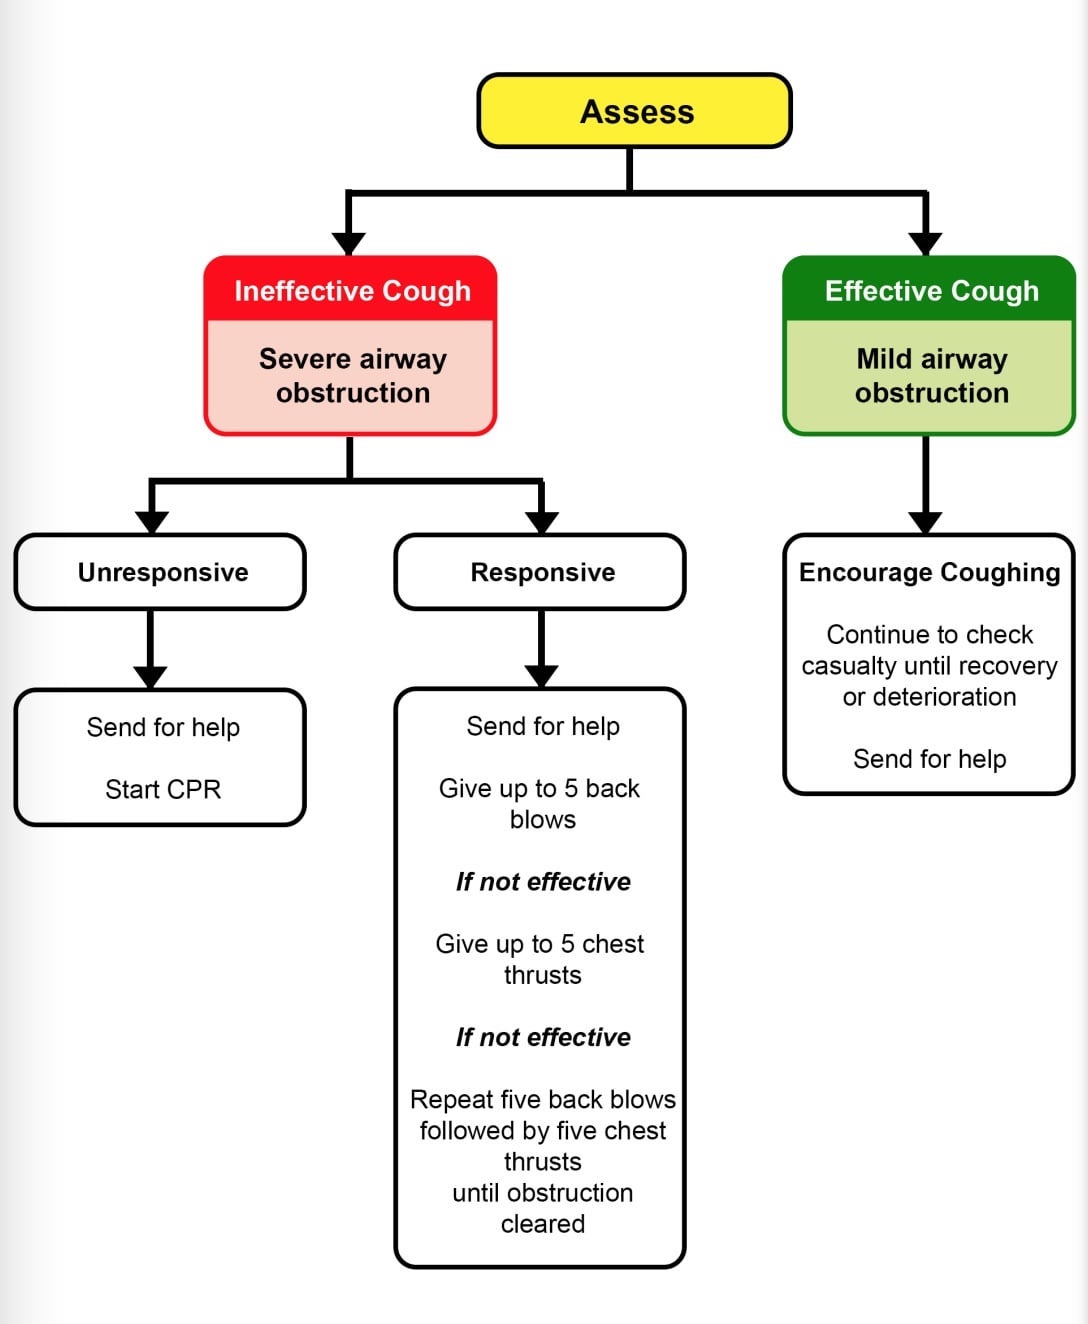 Management of Foreign Body Airway Obstruction (Choking) Algorithm